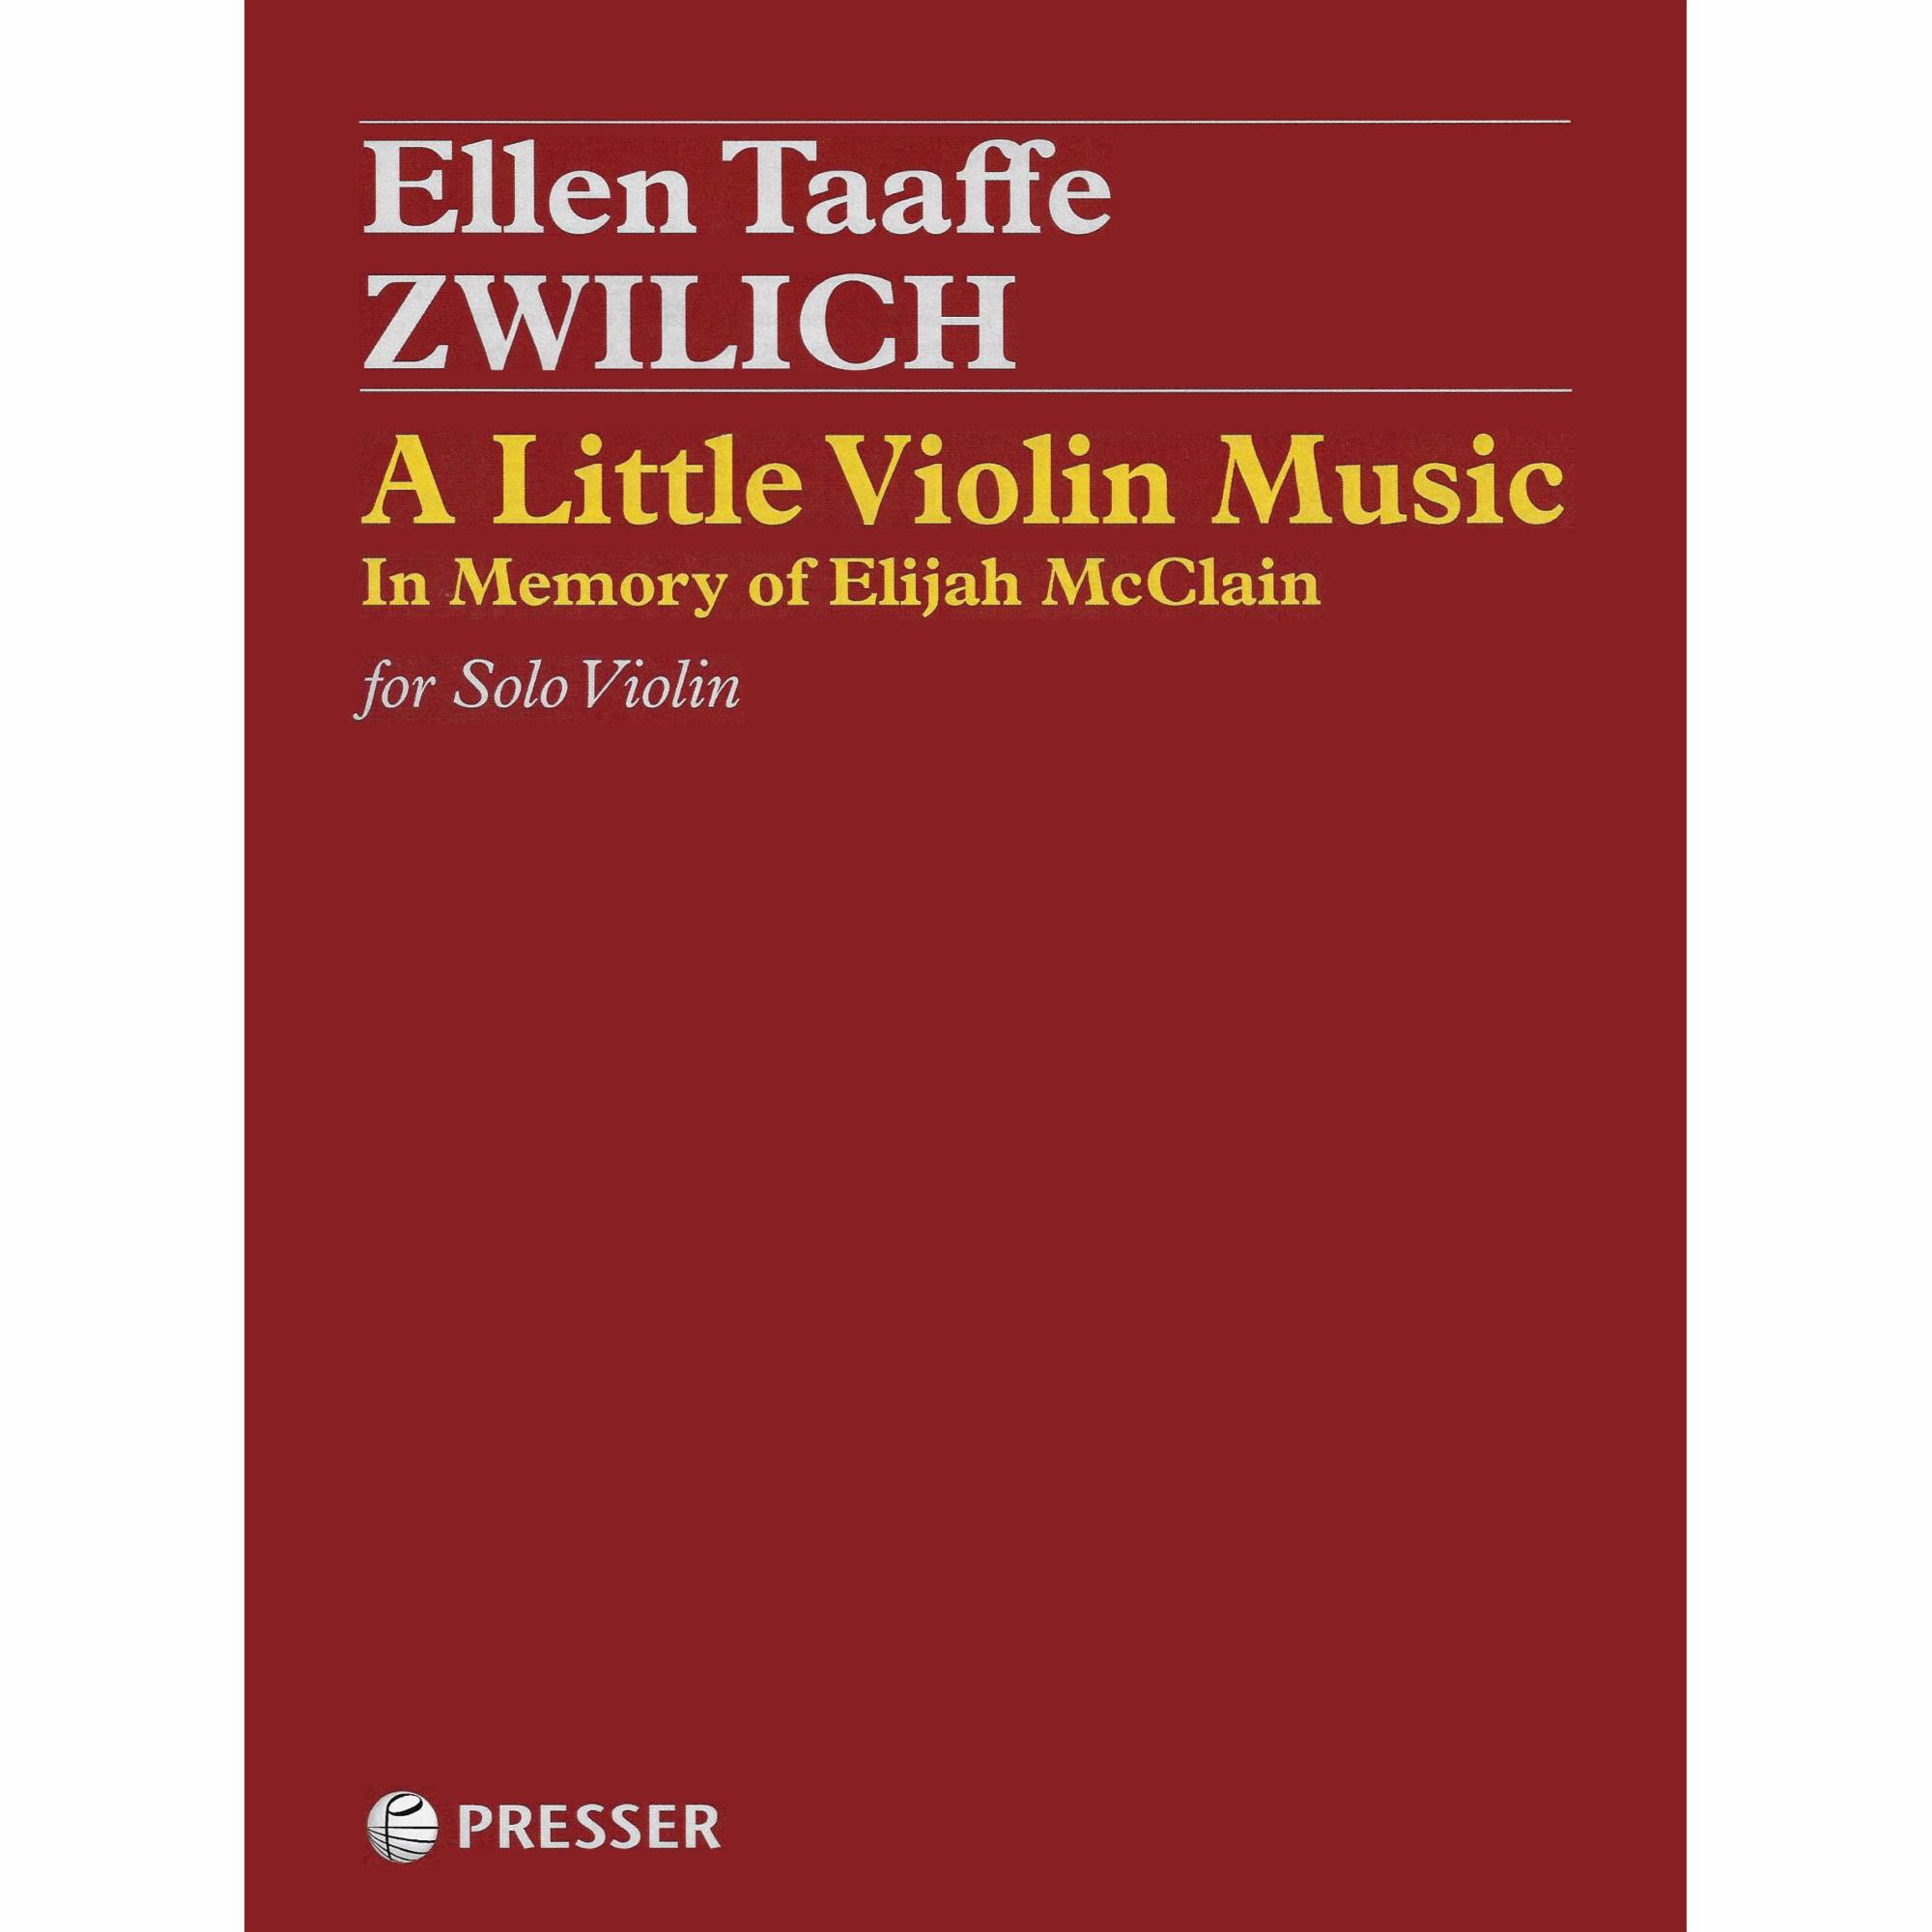 Zwilich -- A Little Violin Music In Memory of Elijah McClain for Solo Violin